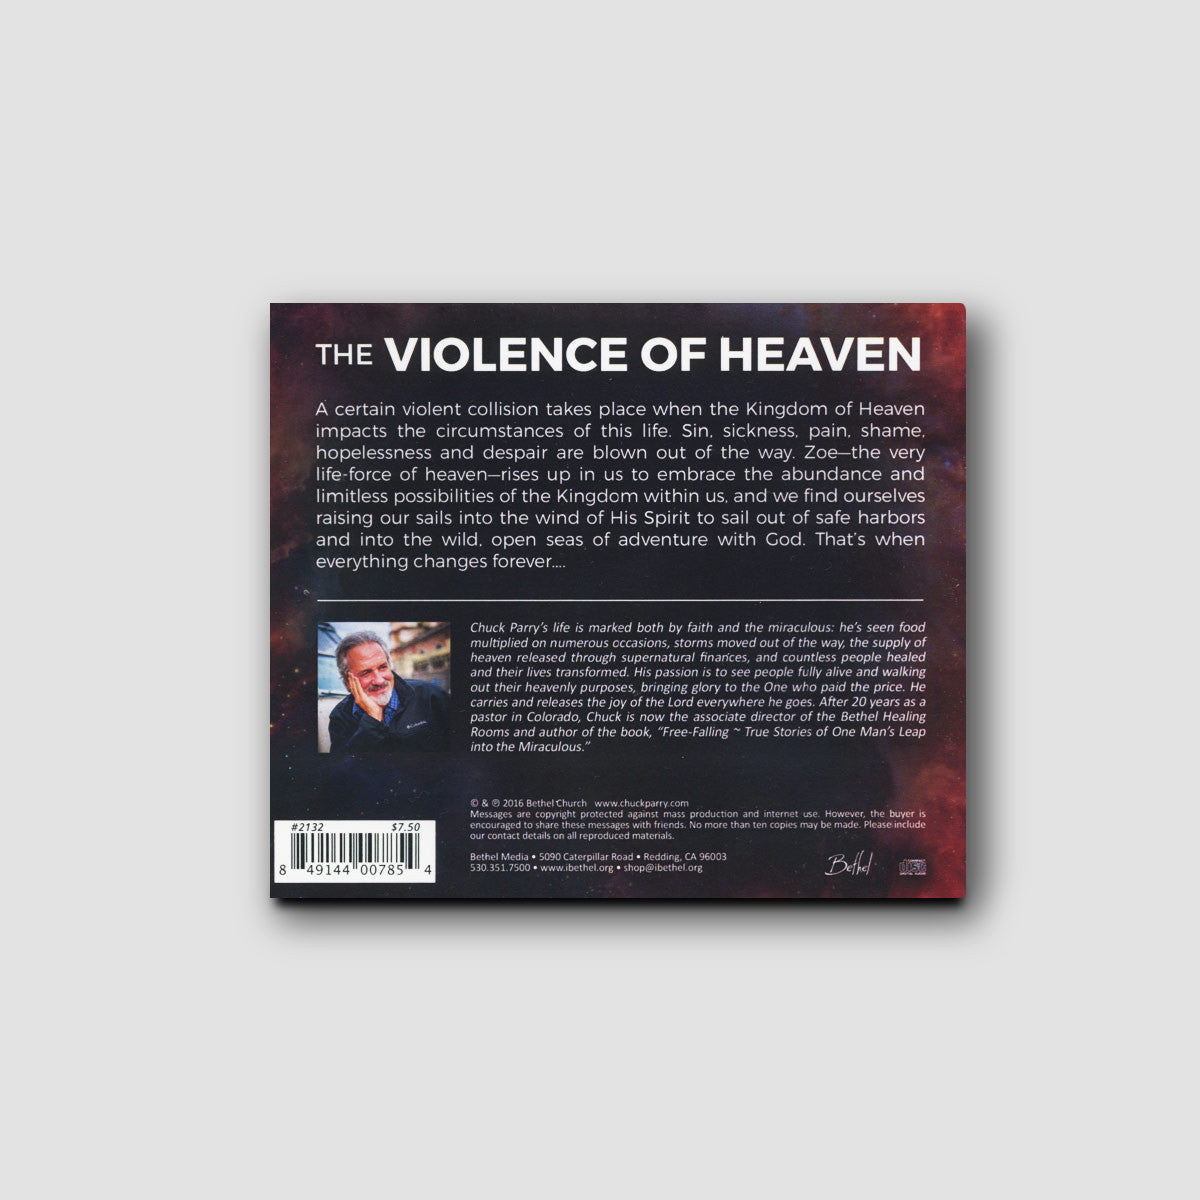 The Violence of Heaven